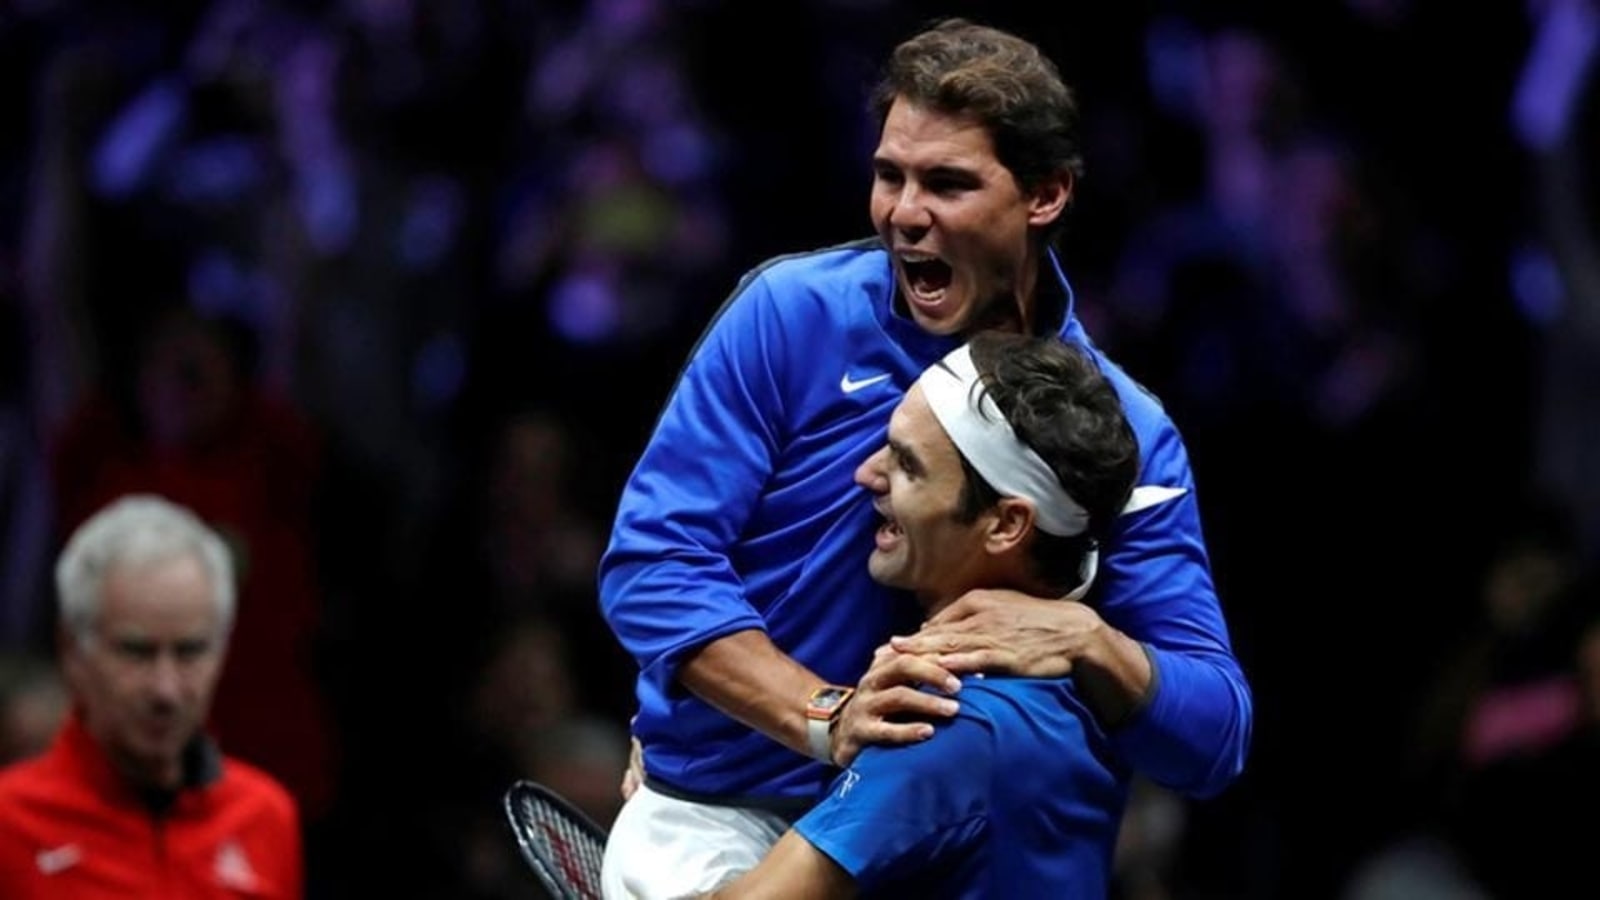 Roger Federer’s classy response to Rafael Nadal after tennis rival’s emotional retirement message